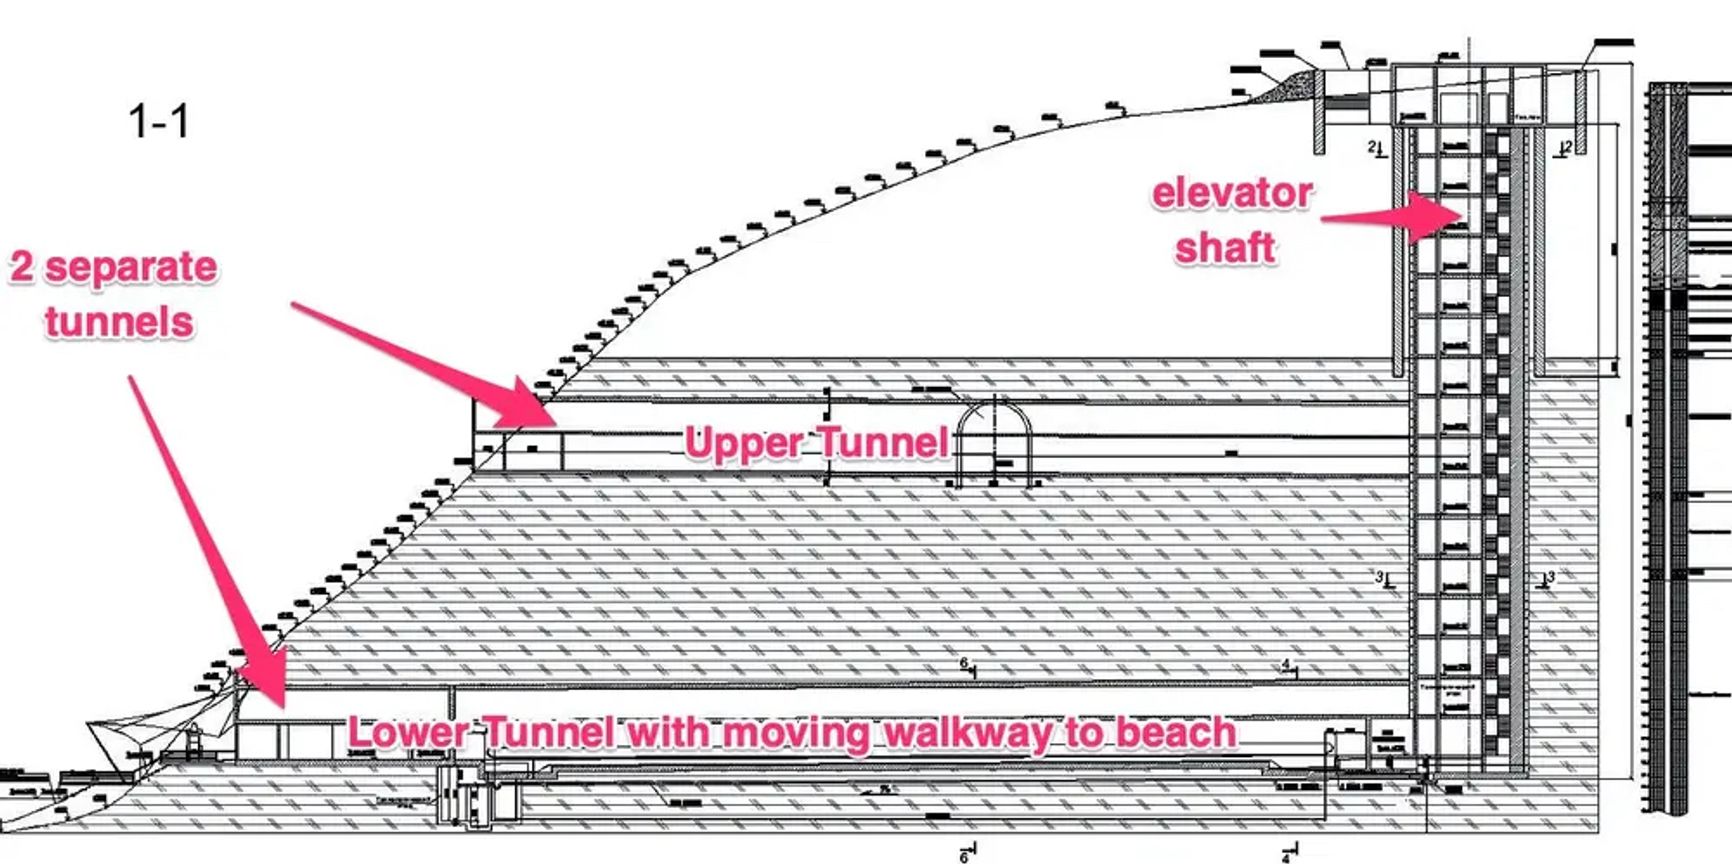 A cross-section of the hillside shows two tunnels connected by an elevator, at right.